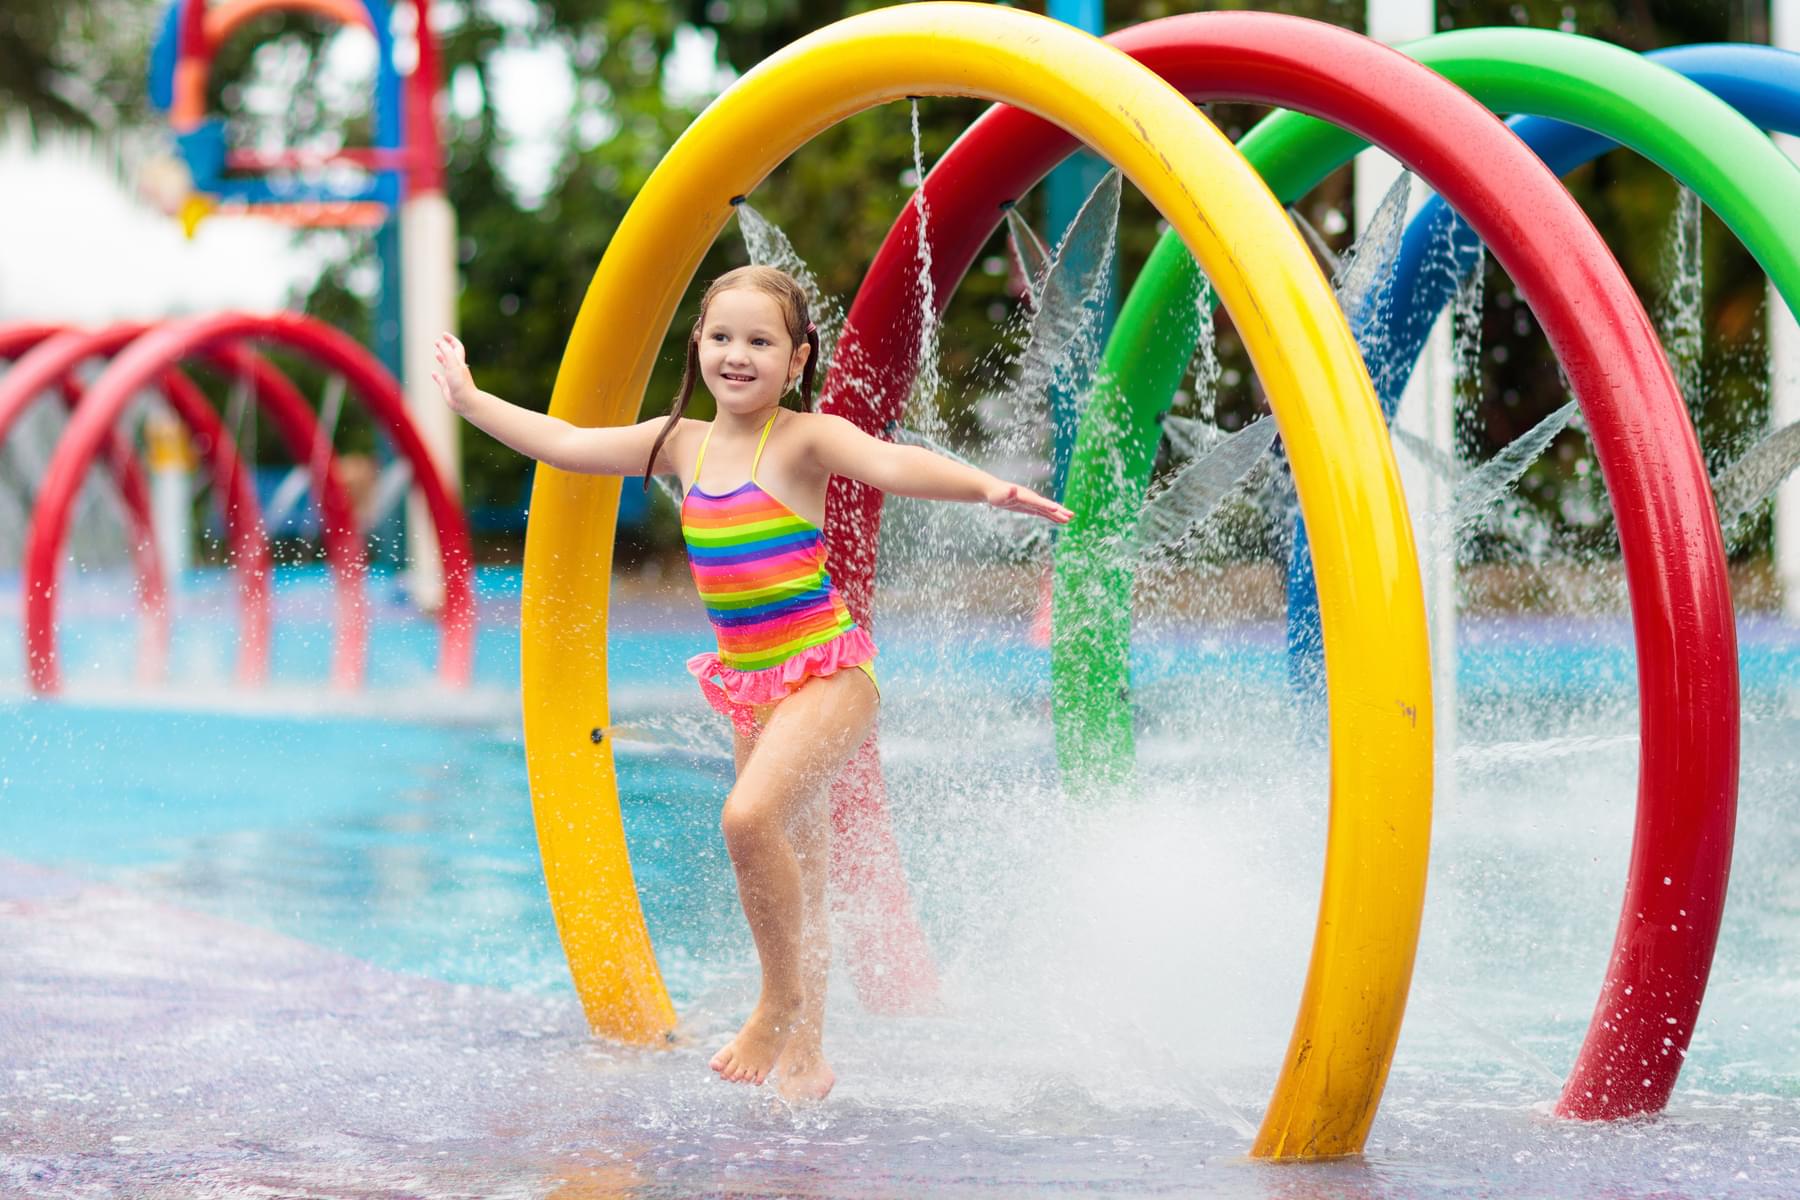 Essential Tips for Adventure Cove Waterpark